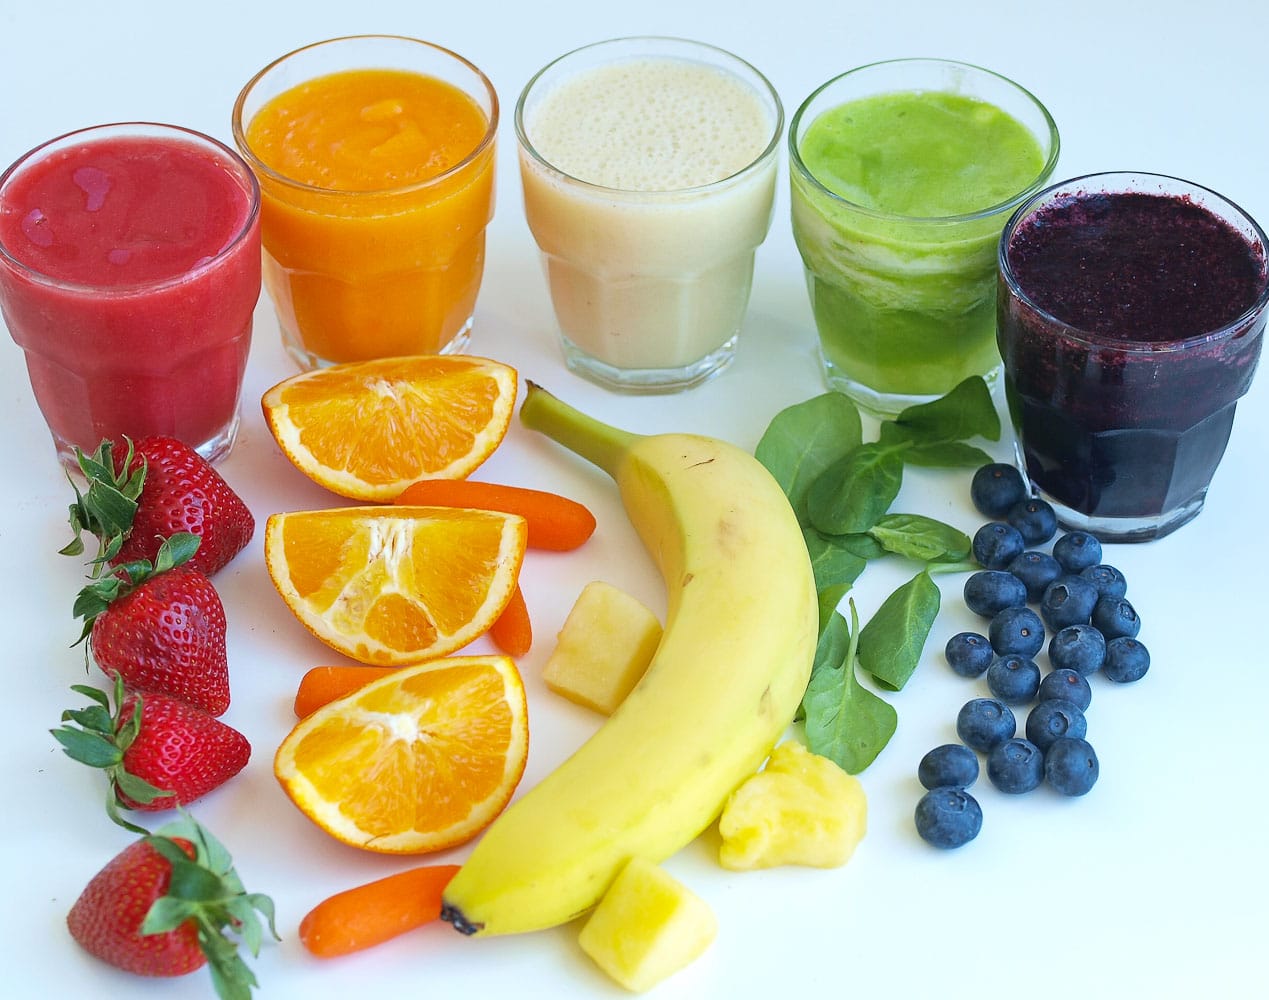 Rainbow Smoothies: A Tasting Activity for Kids